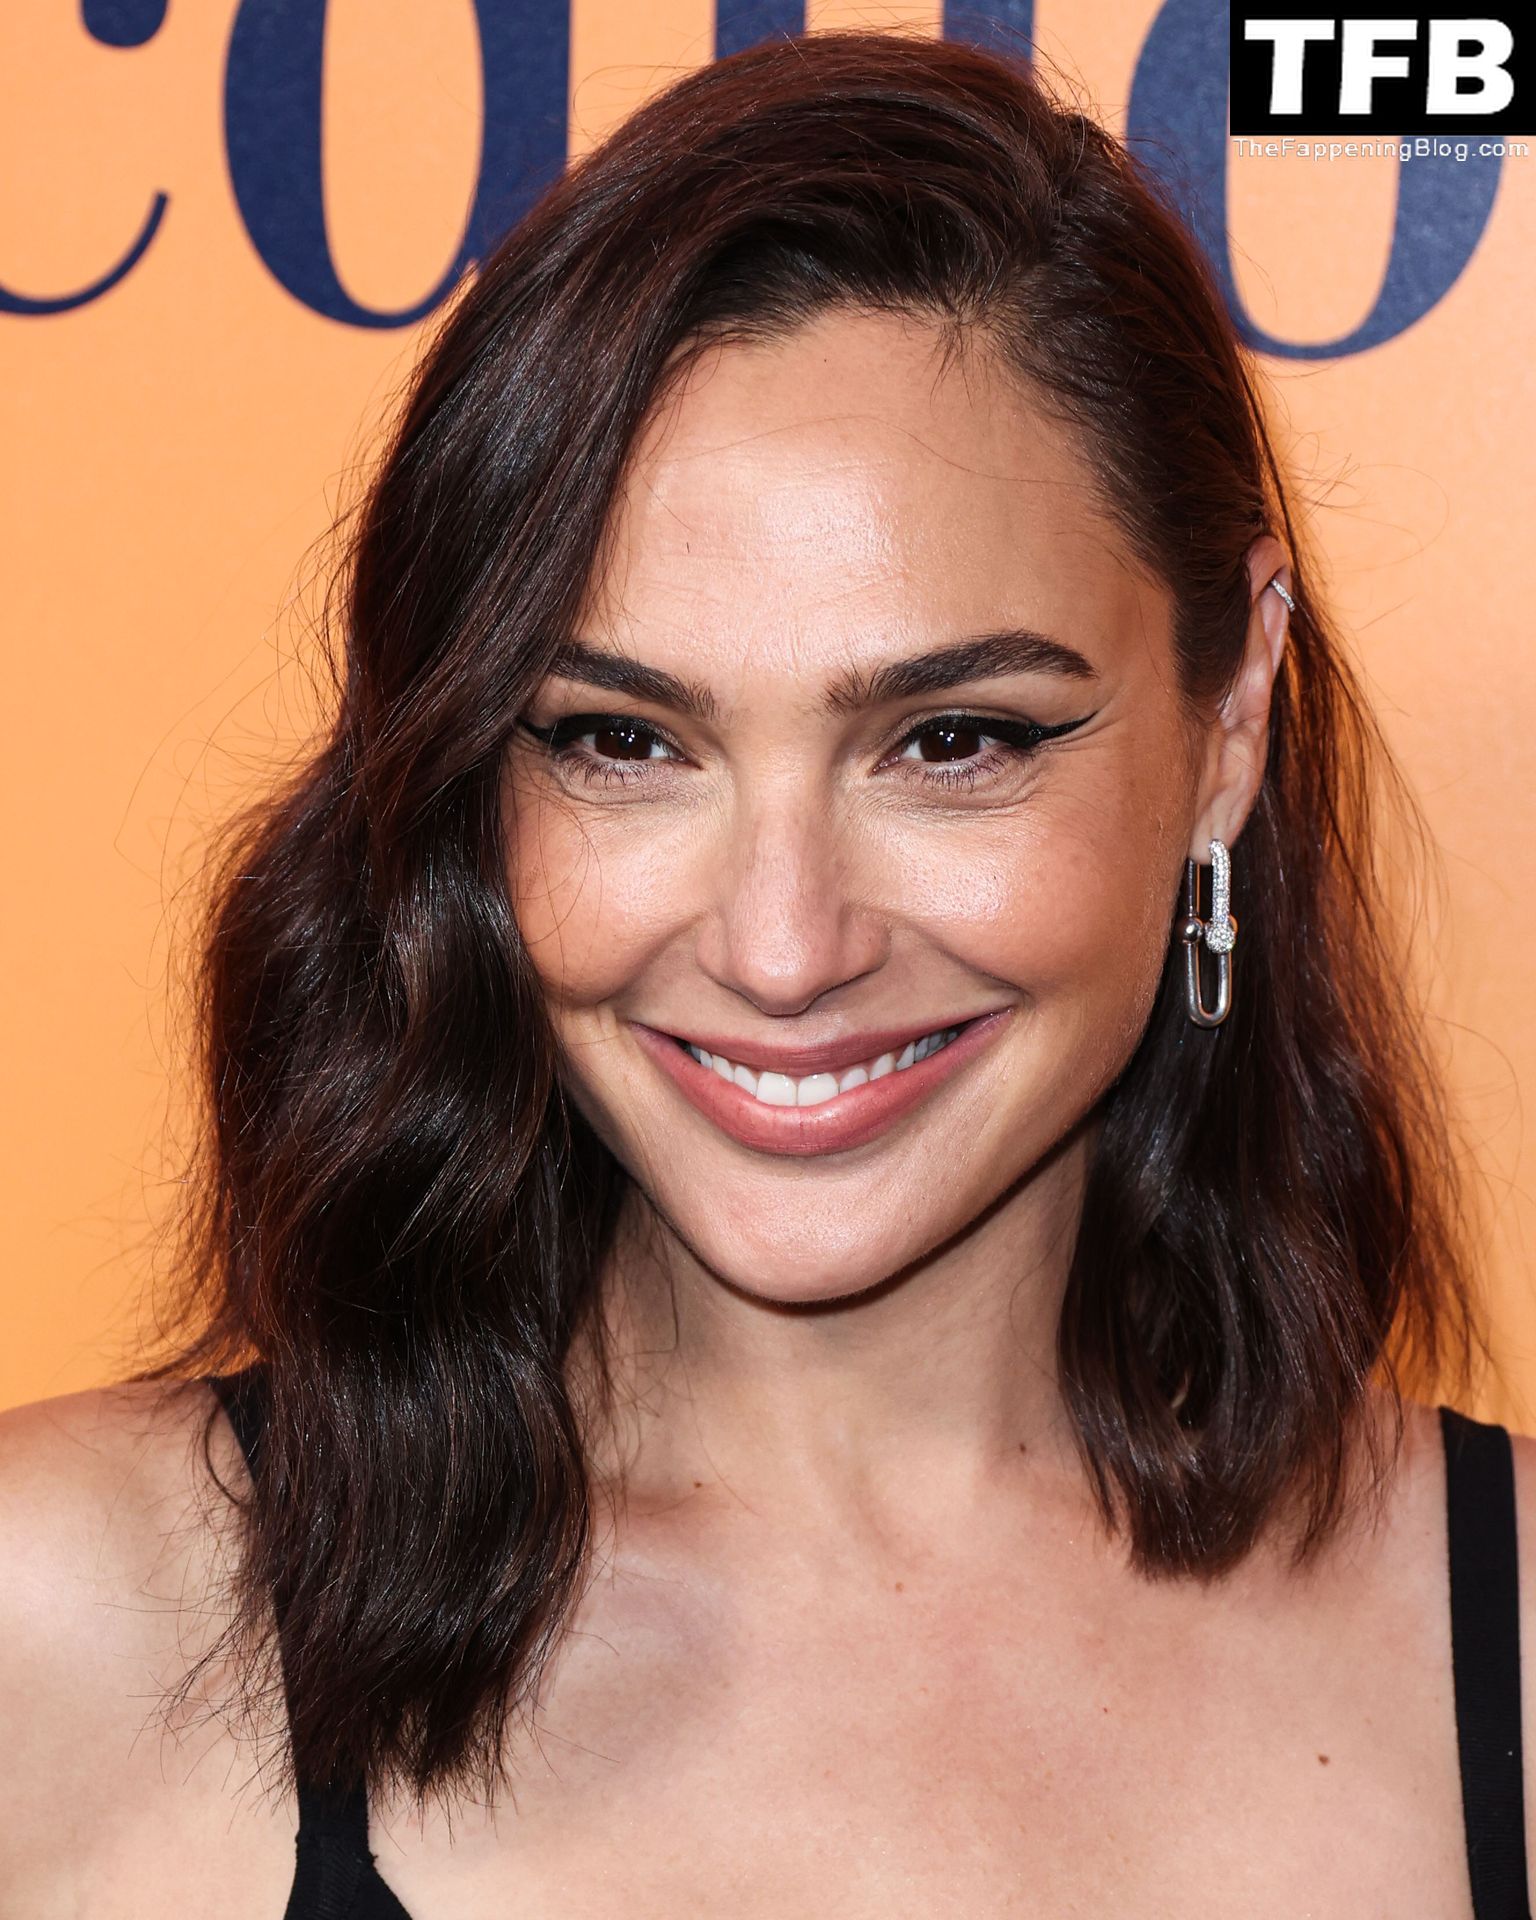 Gal Gadot Sexy 67 thefappeningblog.com  - Gal Gadot Displays Her Gorgeous Figure at the Traveling Exhibition “Solaire Culture” in Beverly Hills (77 Photos)